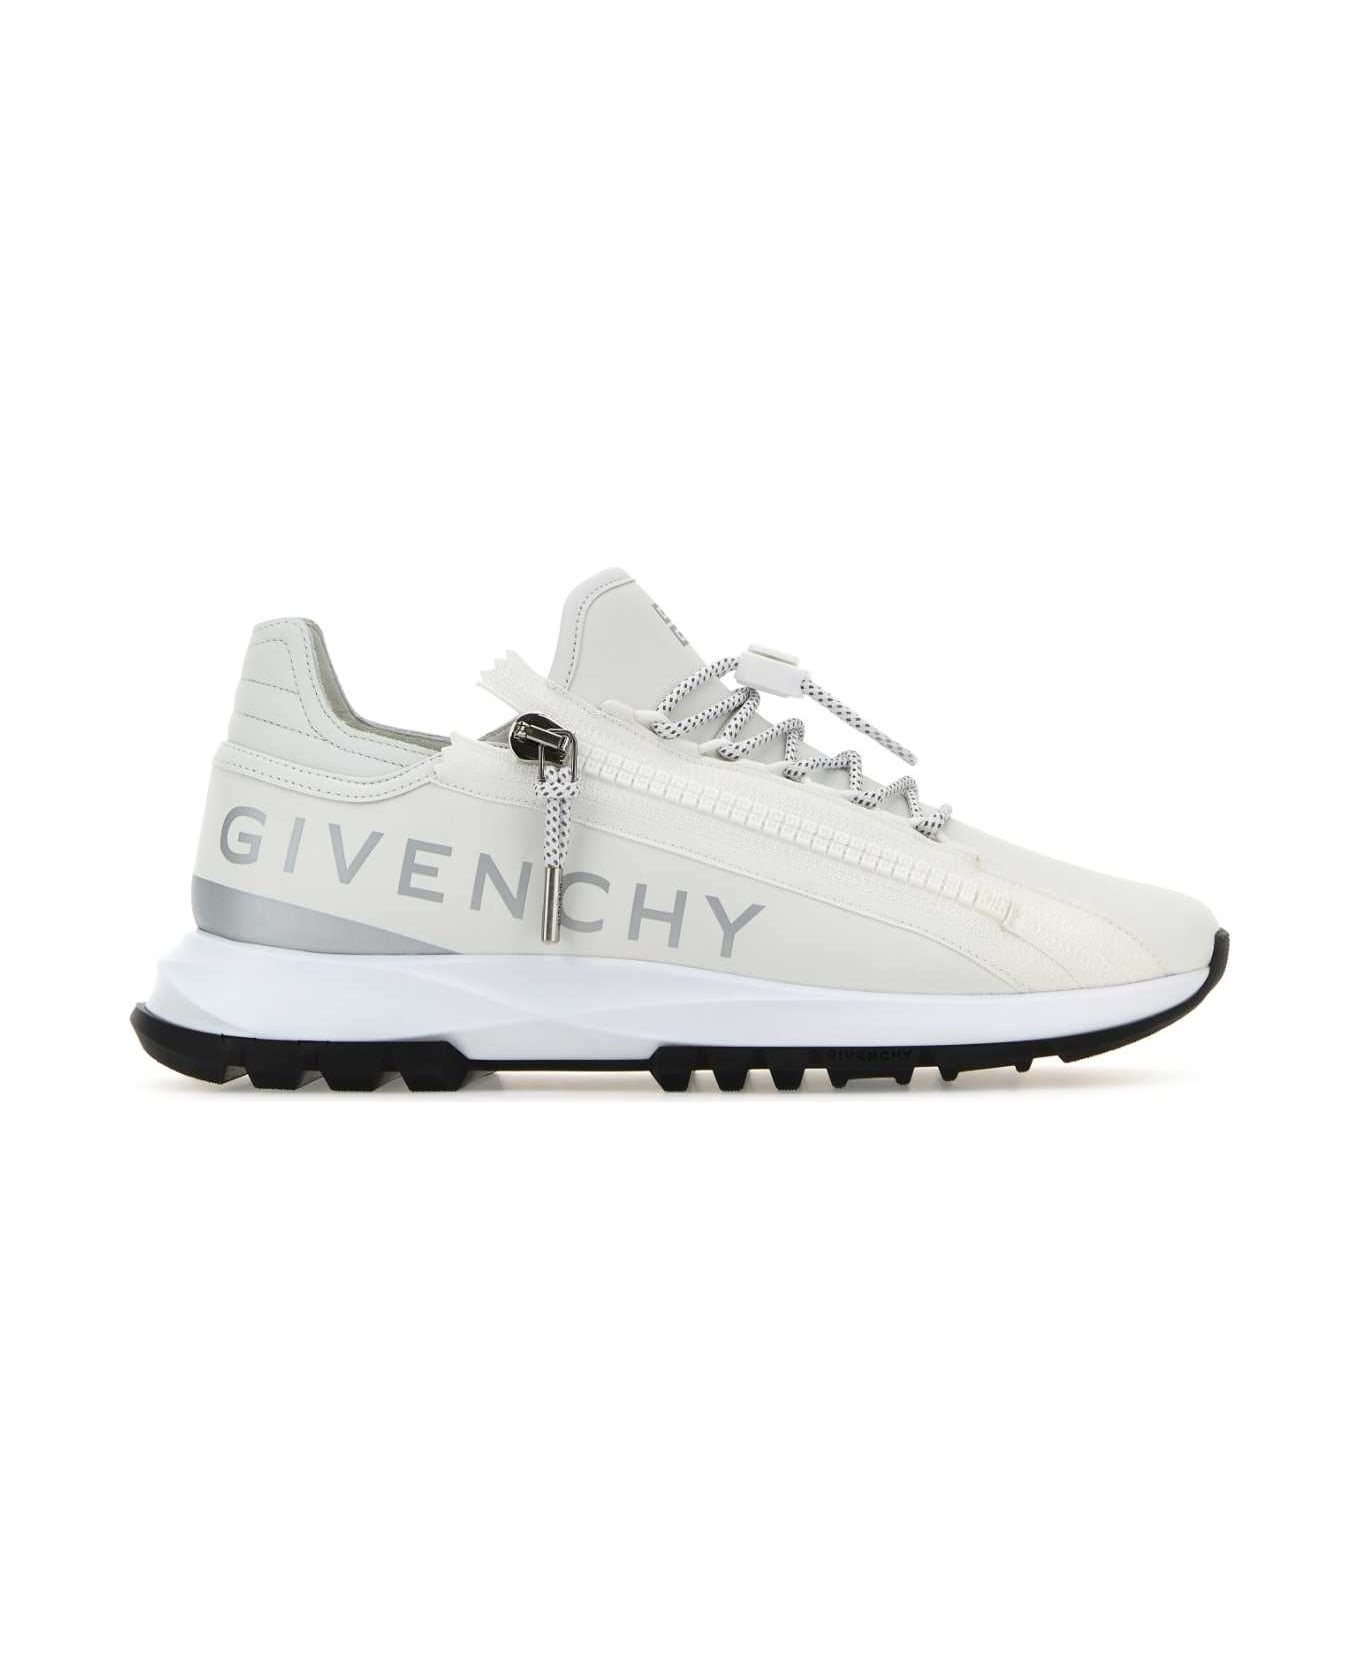 Givenchy White Leather Spectre Sneakers - WHITESILVERY